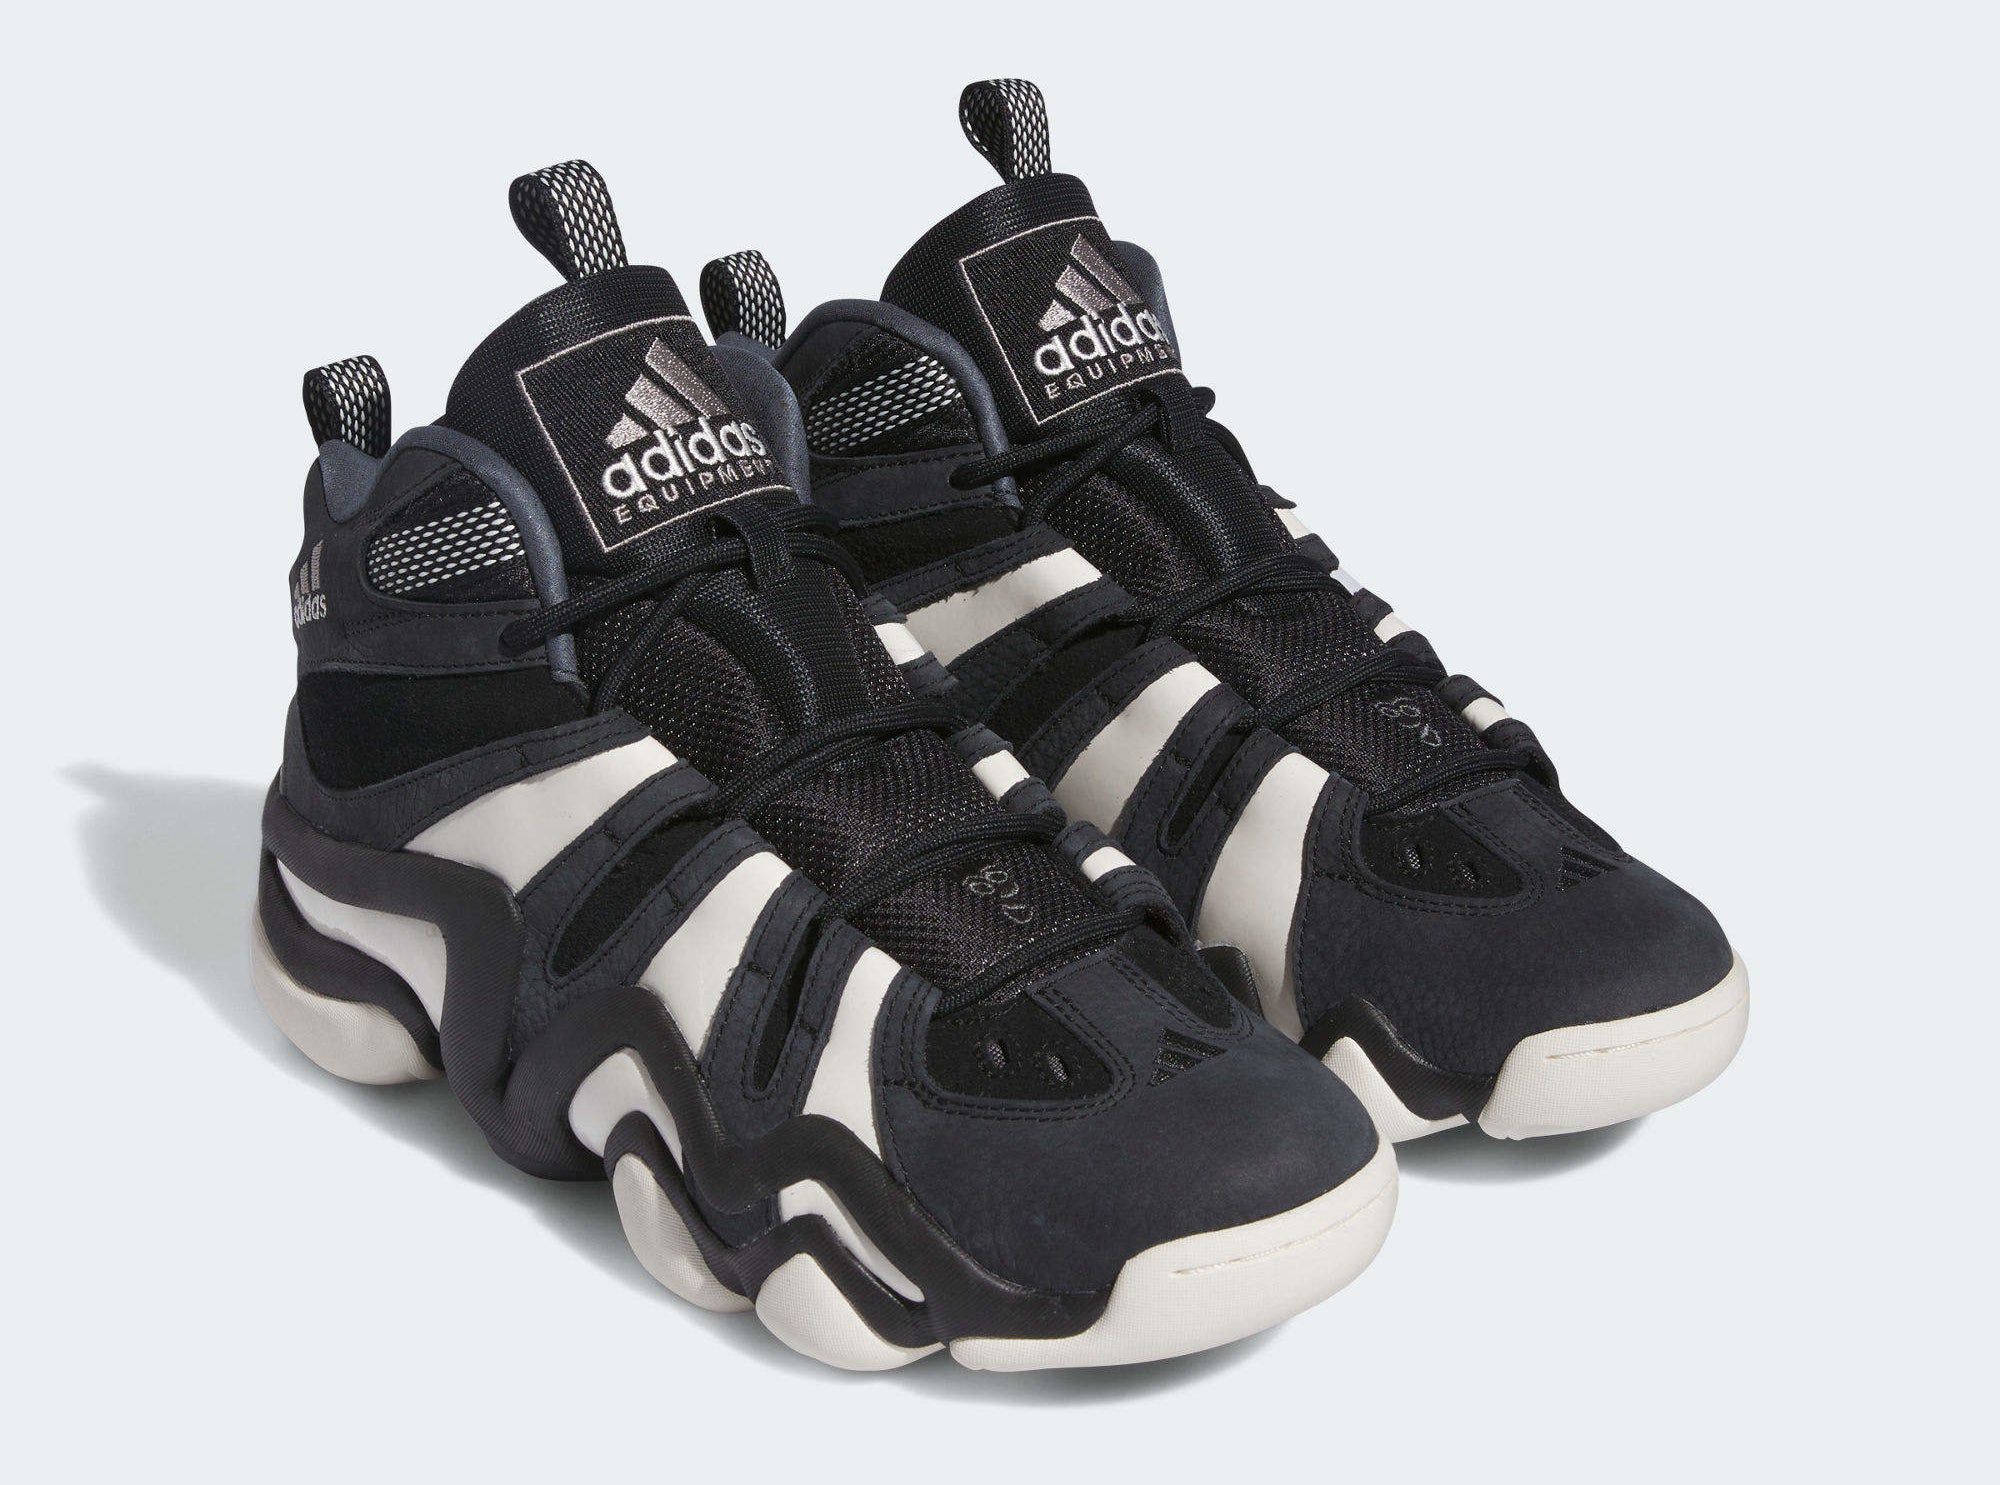 Adidas Crazy 8 Kobe Bryant Sneaker Release Date IF2448 | Complex